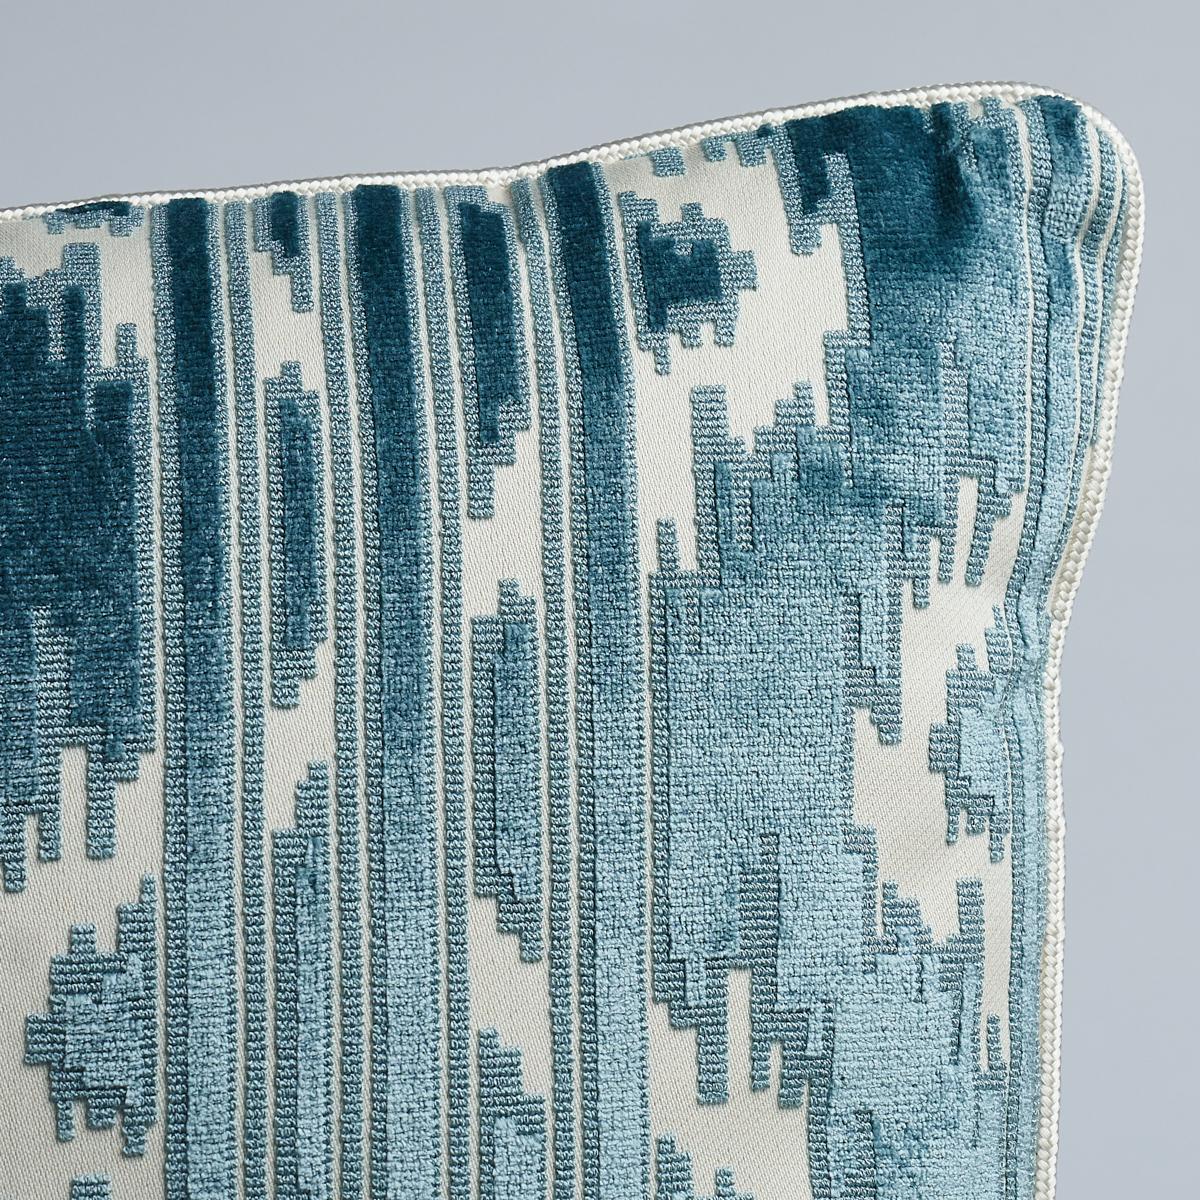 This pillow features Gibson with a knife edge finish. Super soft chenille yarns form an irregular, abstracted pattern on a contrasting ground. Pillow includes a feather/down fill insert and hidden zipper closure.

*If out of stock, lead-time is